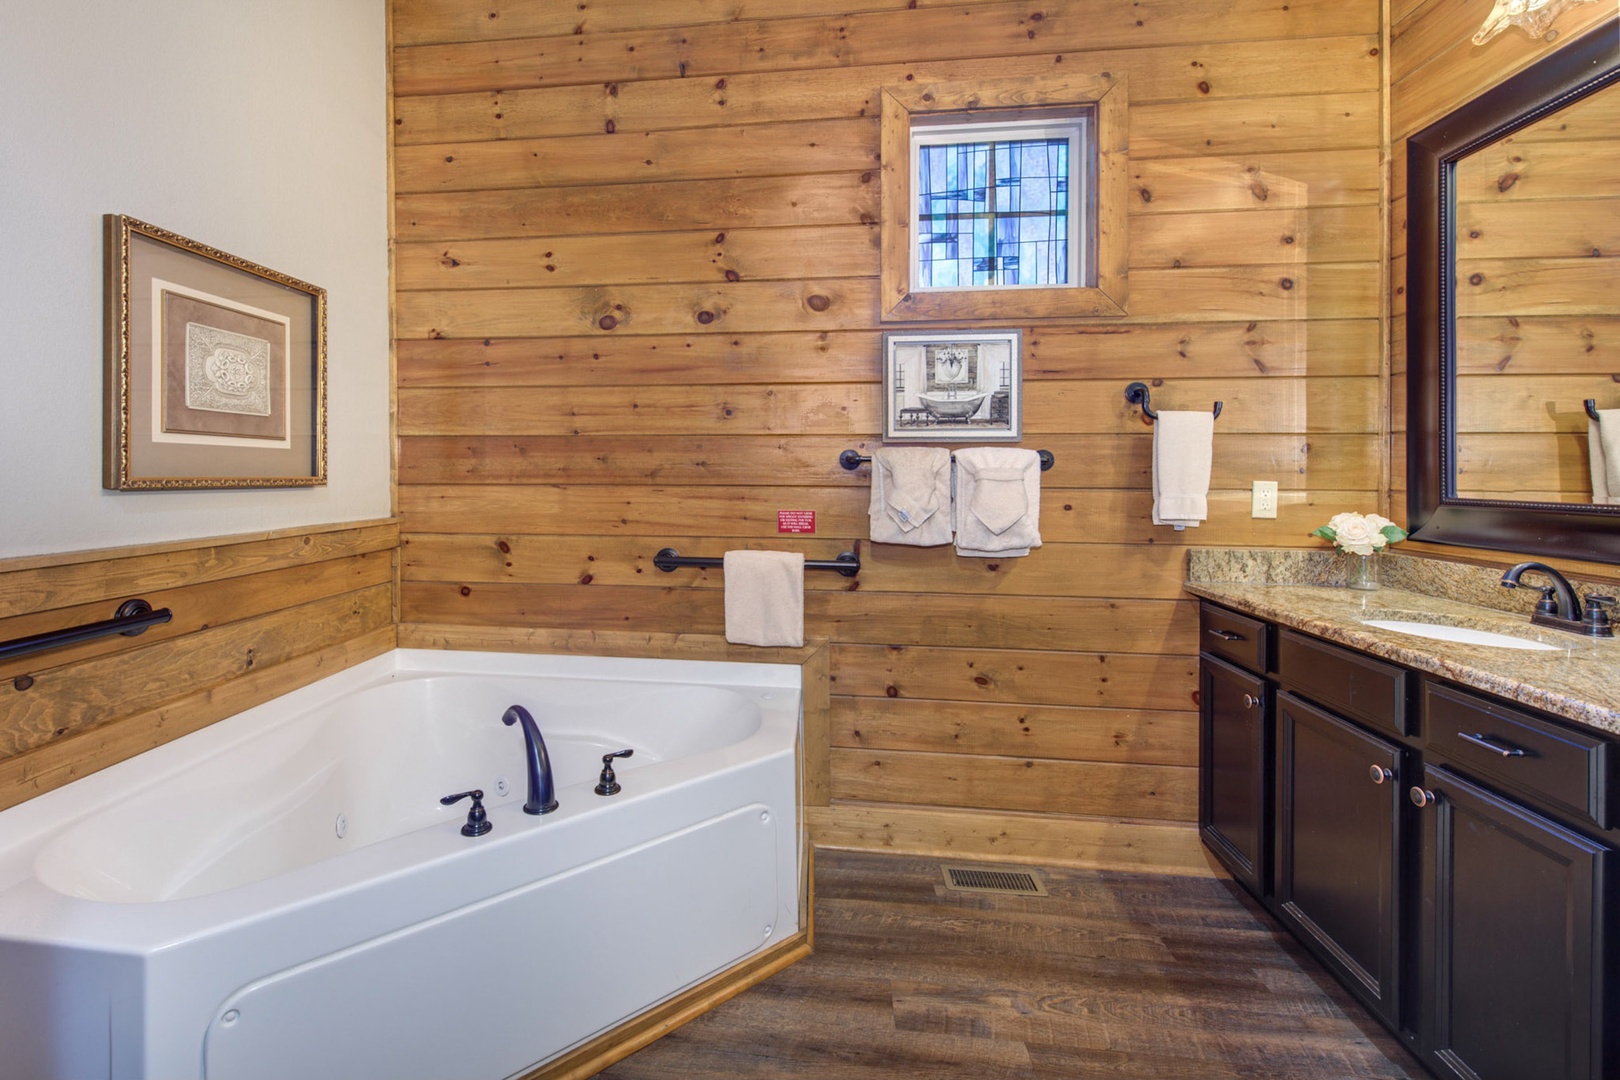 This ensuite bath boasts a large vanity, shower, & luxurious soaking tub